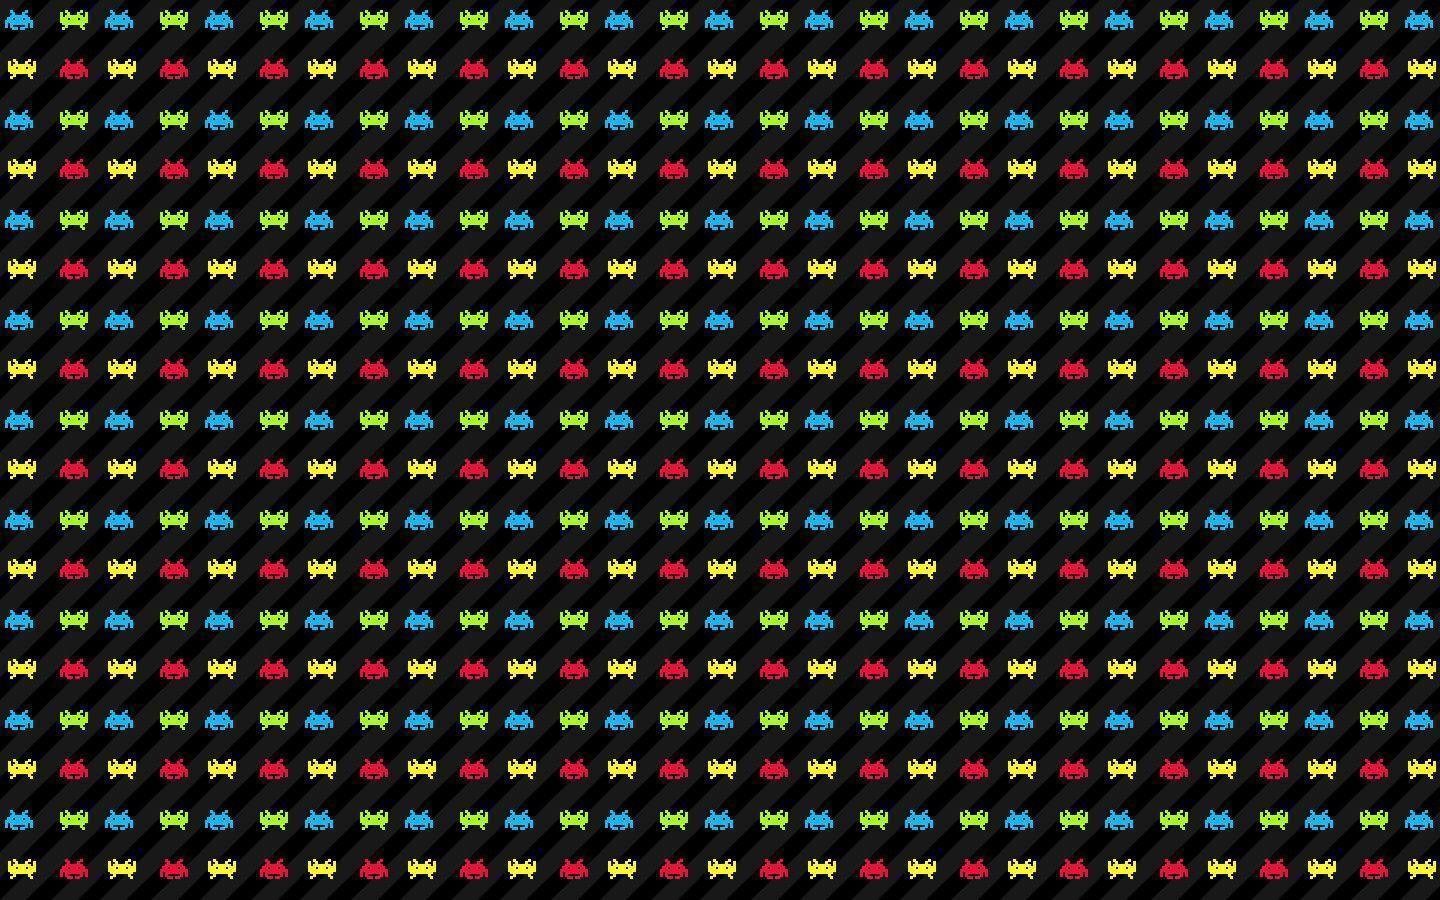 Space Invaders Wallpapers 37581 1440x900 px